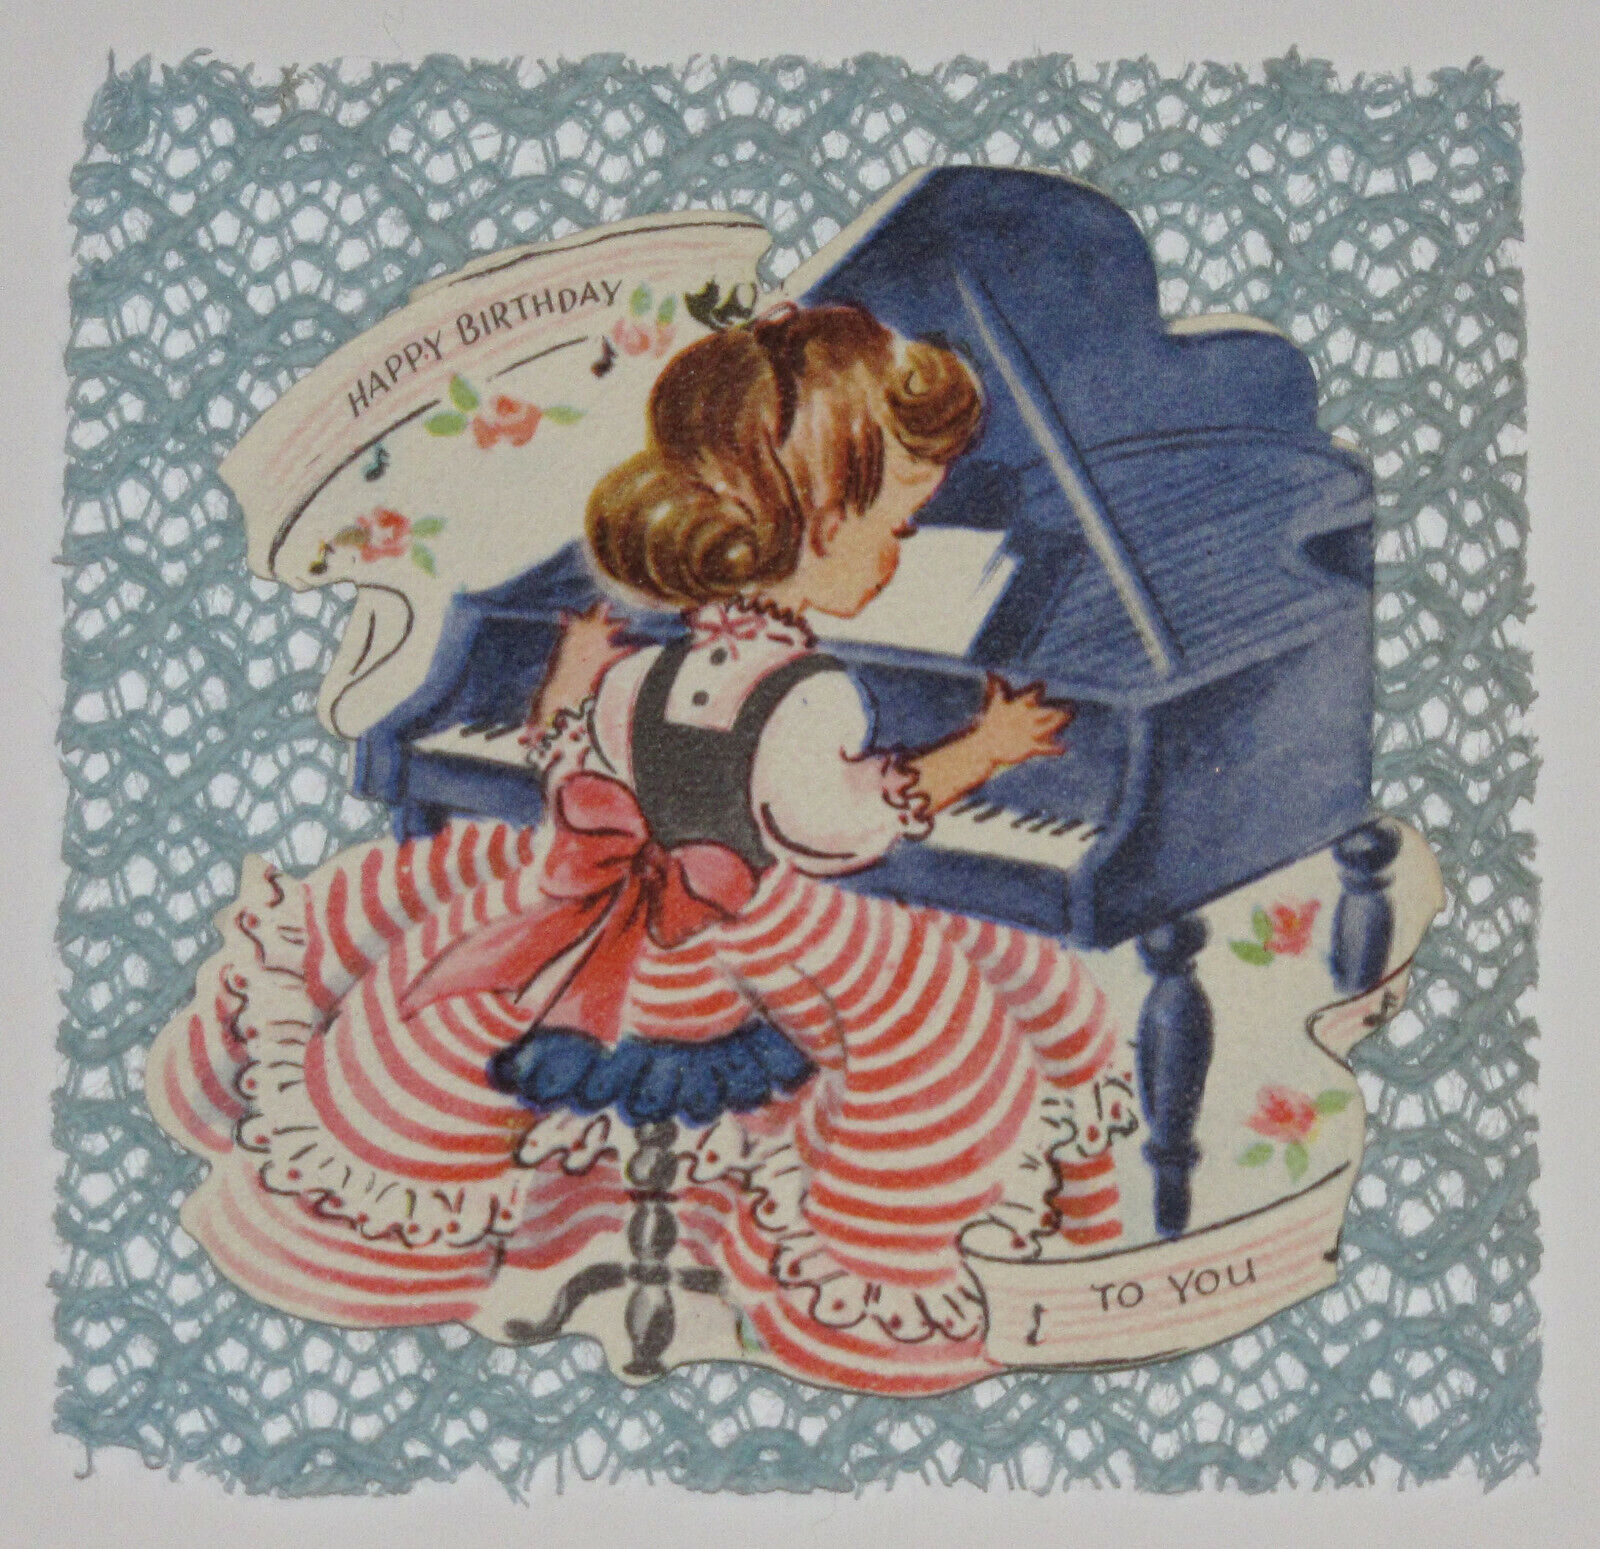 VINTAGE GREETING CARD DIE CUT LACE HAPPY BIRTHDAY GIRL PLAYING PIANO MUSIC NOTES